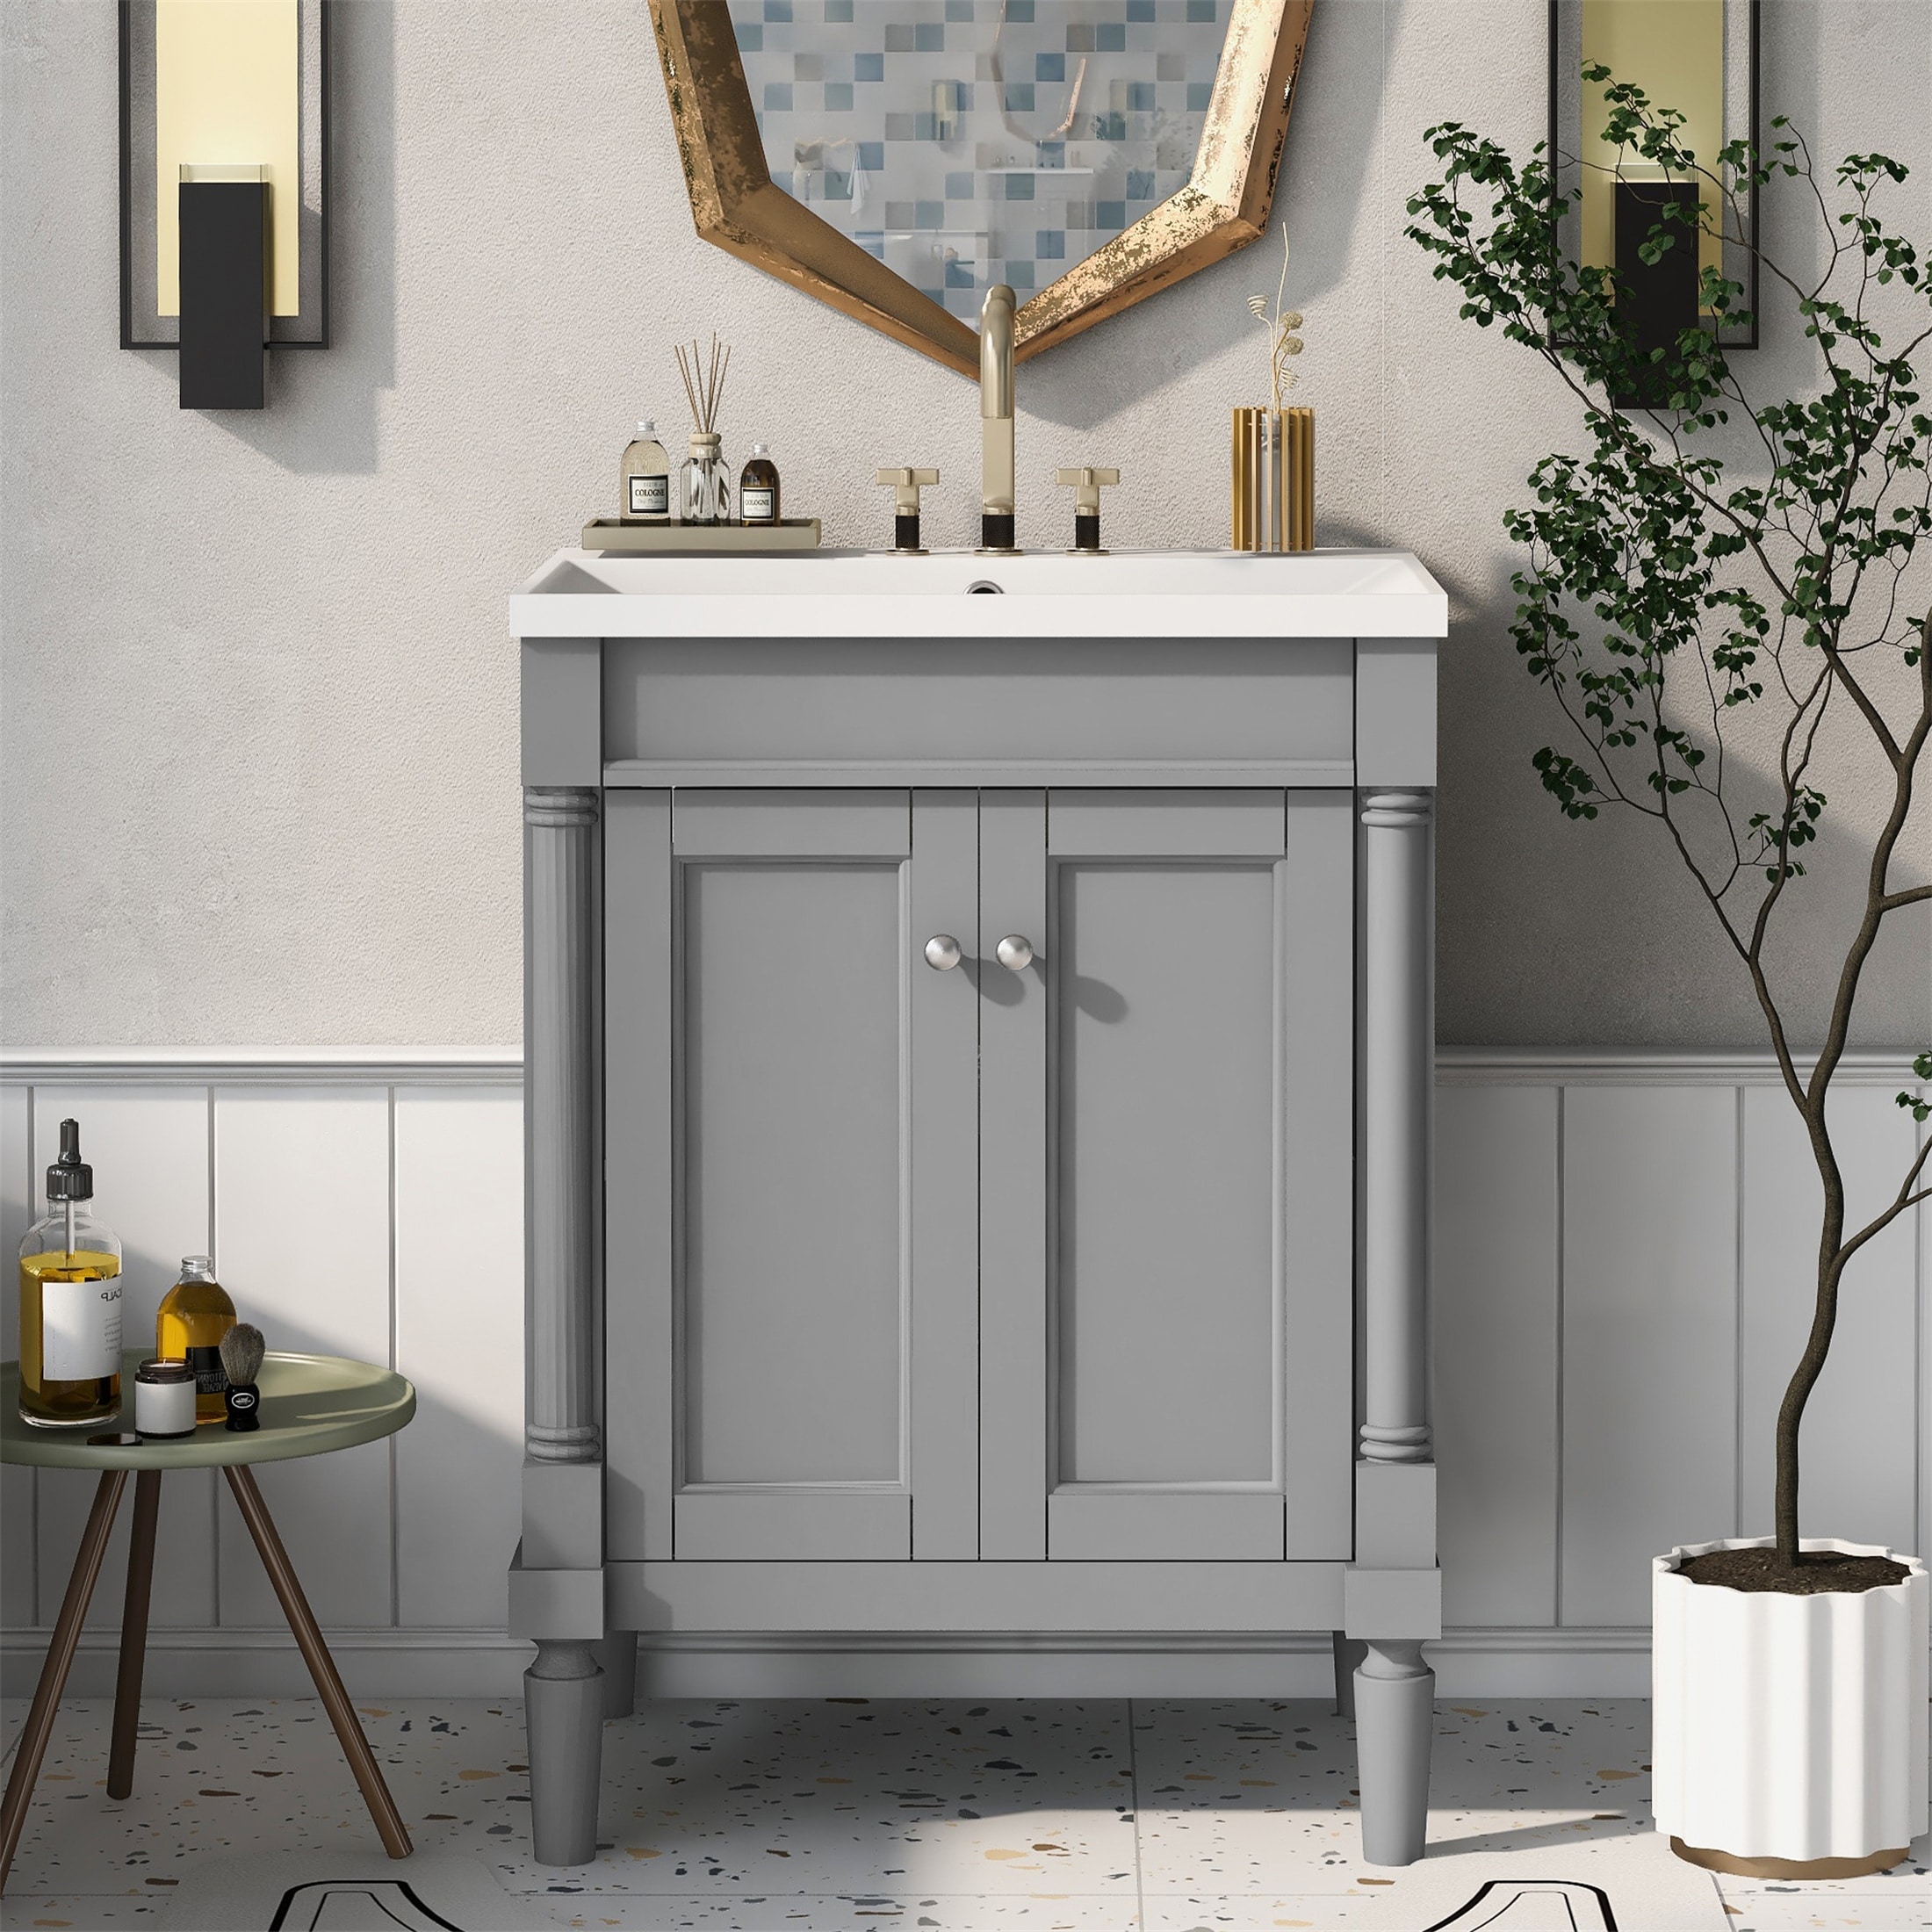 https://ak1.ostkcdn.com/images/products/is/images/direct/e87173eb0c5076012710d6d011066cb6dc3b4fa4/24-Inch-Bathroom-Vanity-with-Top-Sink-2-Tier-Storage-Cabinet.jpg